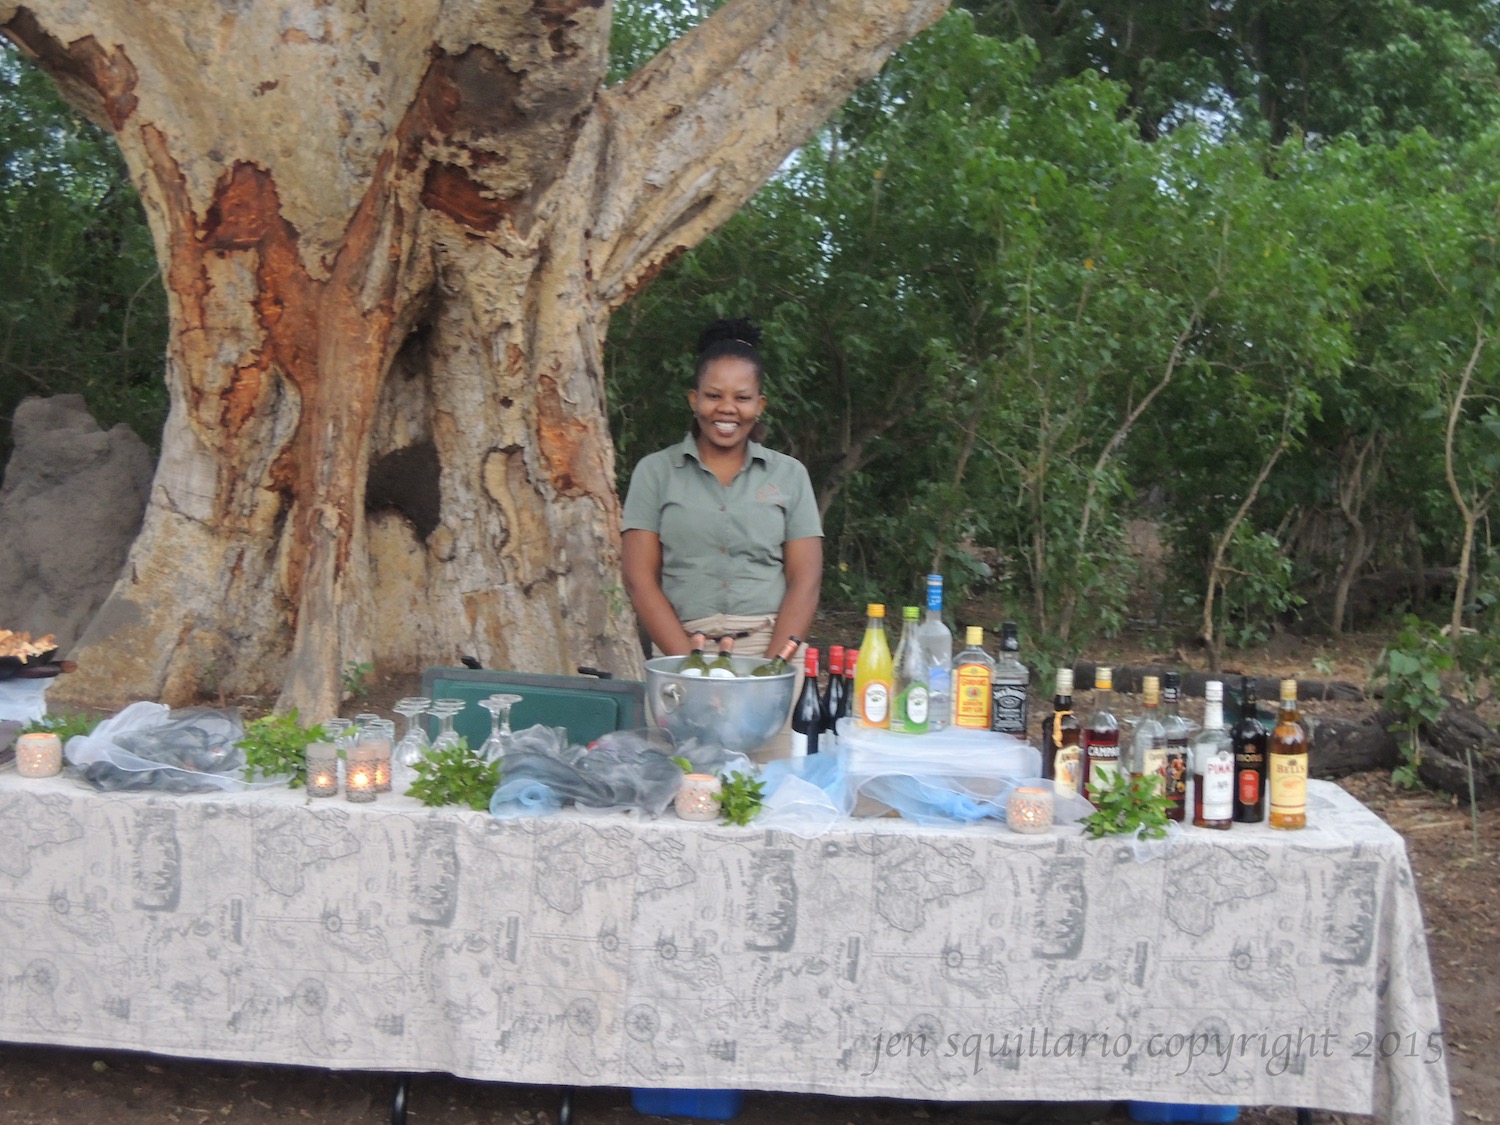 Happy Hour in the Bush